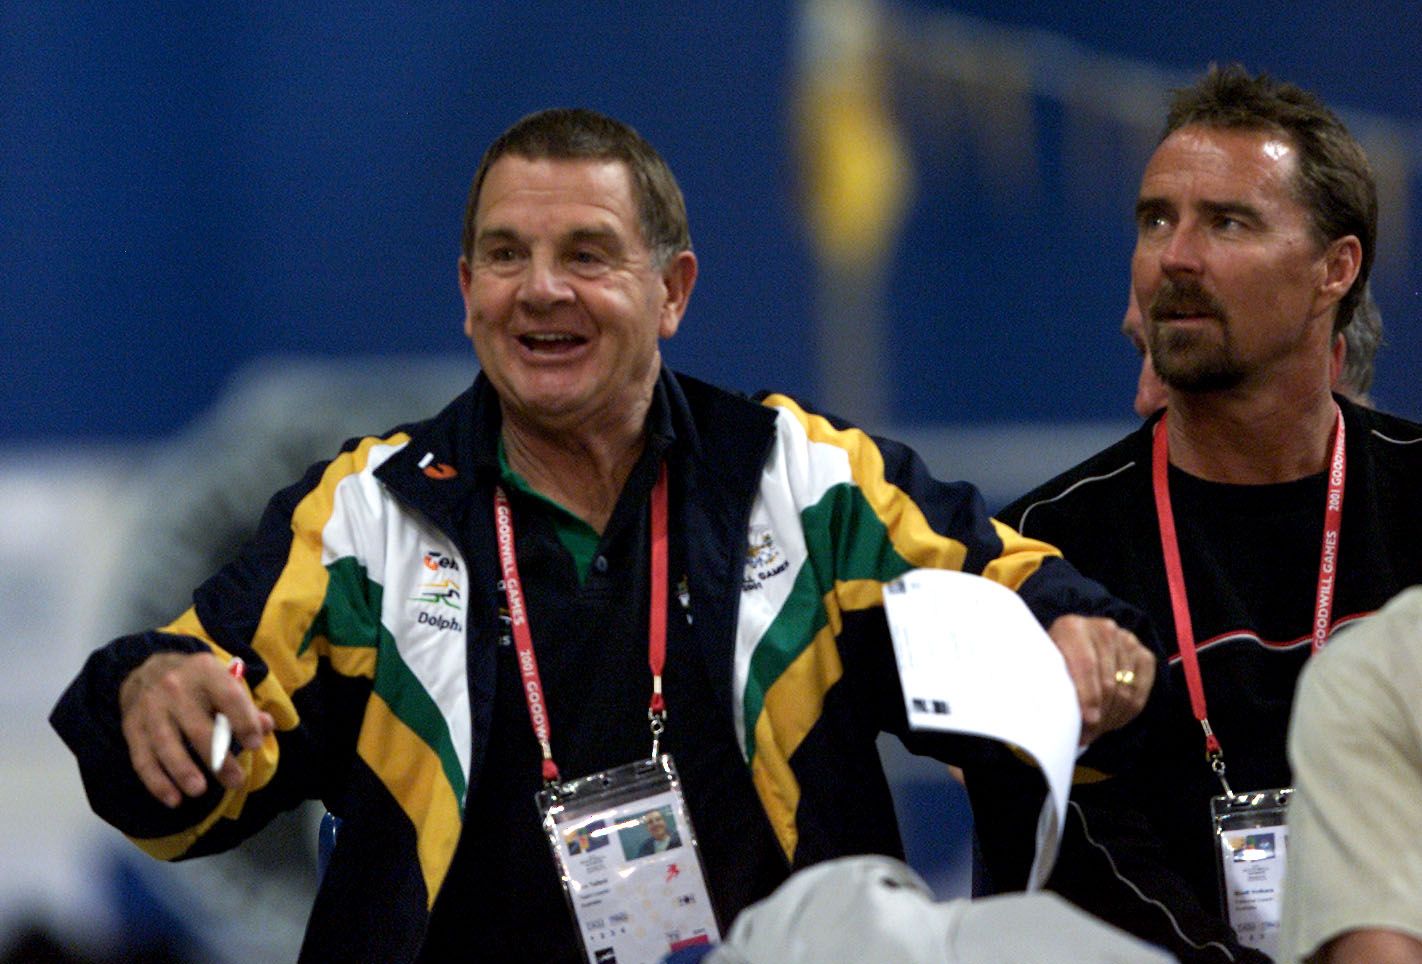 Don Talbot National Swim Coach of Australia at the Chandler Aquatic Centre during the Goodwill Games in Brisbane, Australia on  September 2, 2001. | Photo: Getty Images